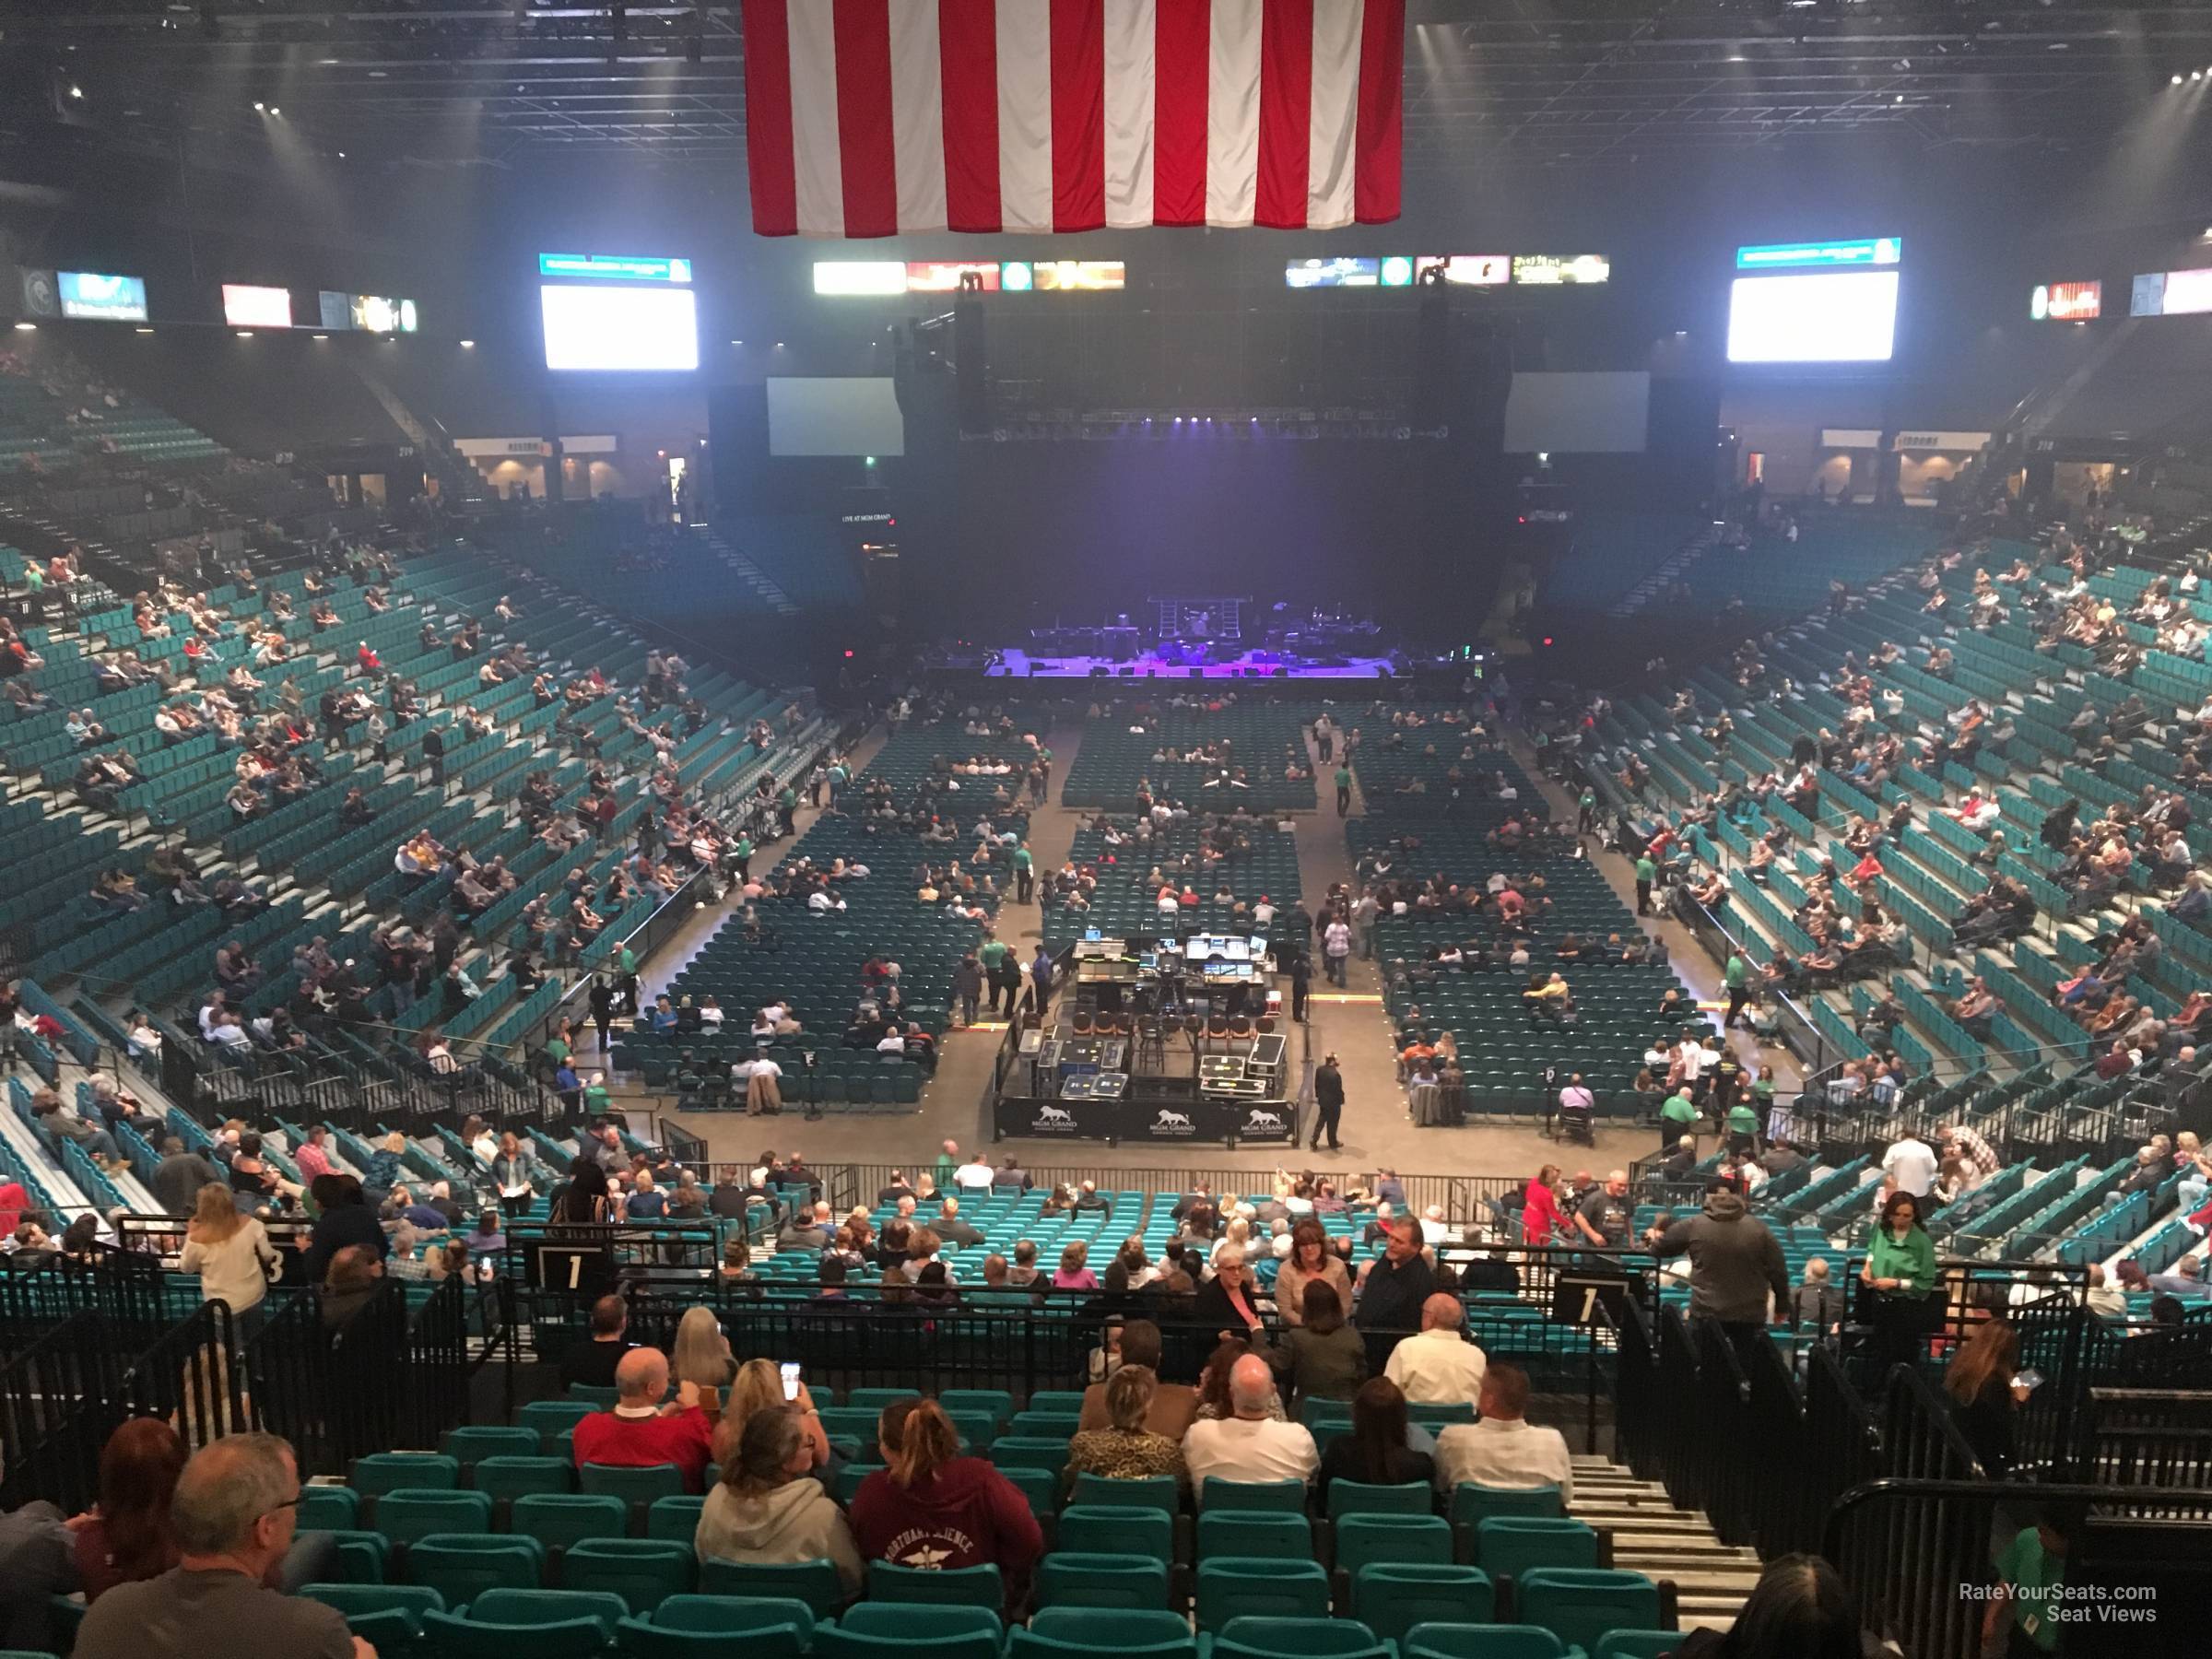 section 201, row f seat view  - mgm grand garden arena